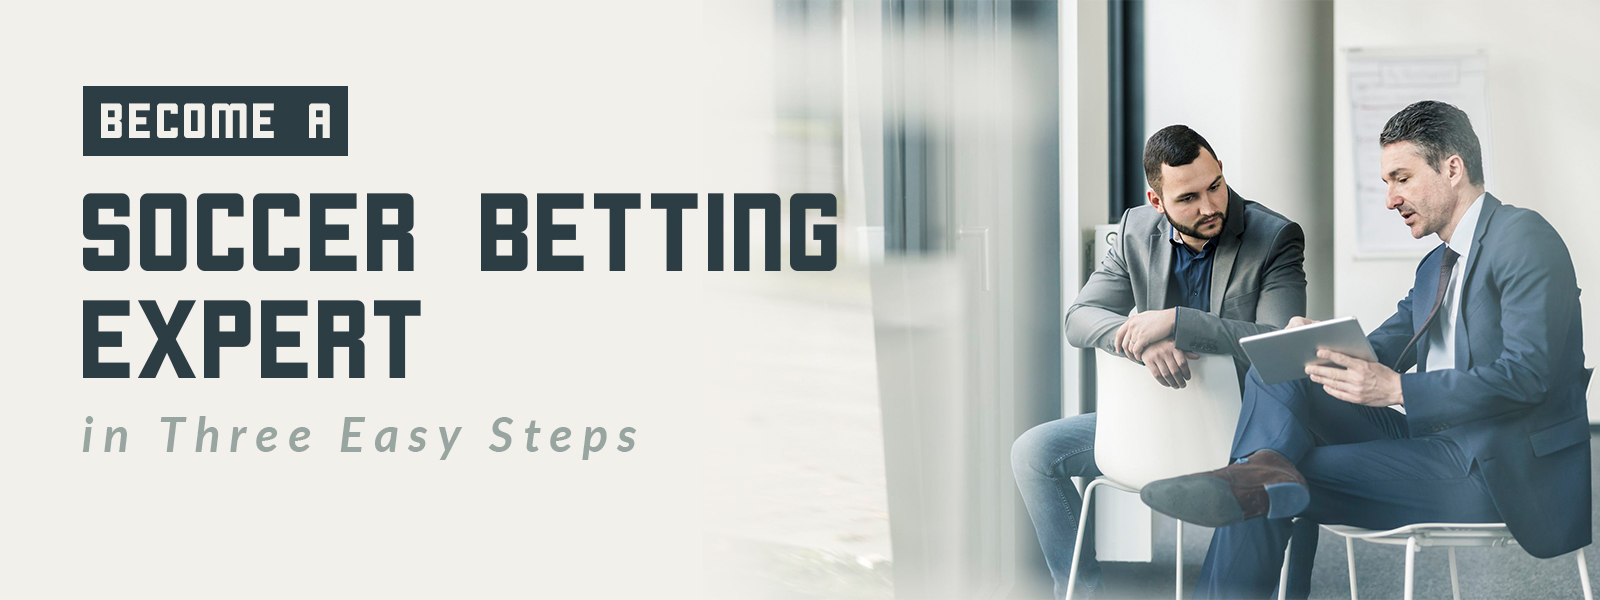 Become A Soccer Betting Expert In Three Easy Steps